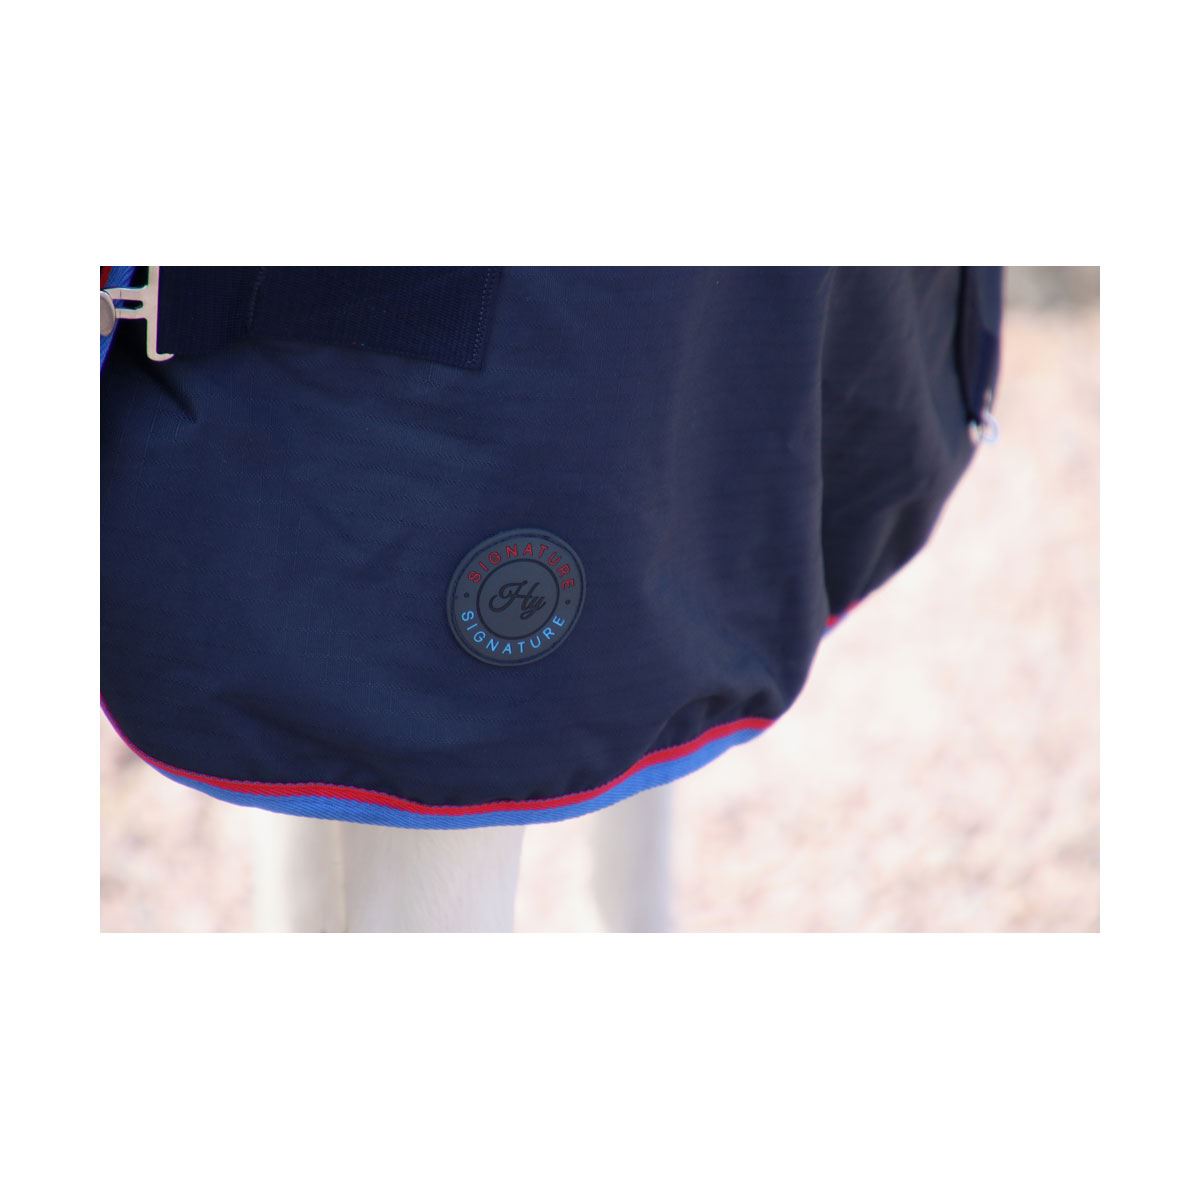 Hy Signature 200g Combi Turnout Rug - Just Horse Riders